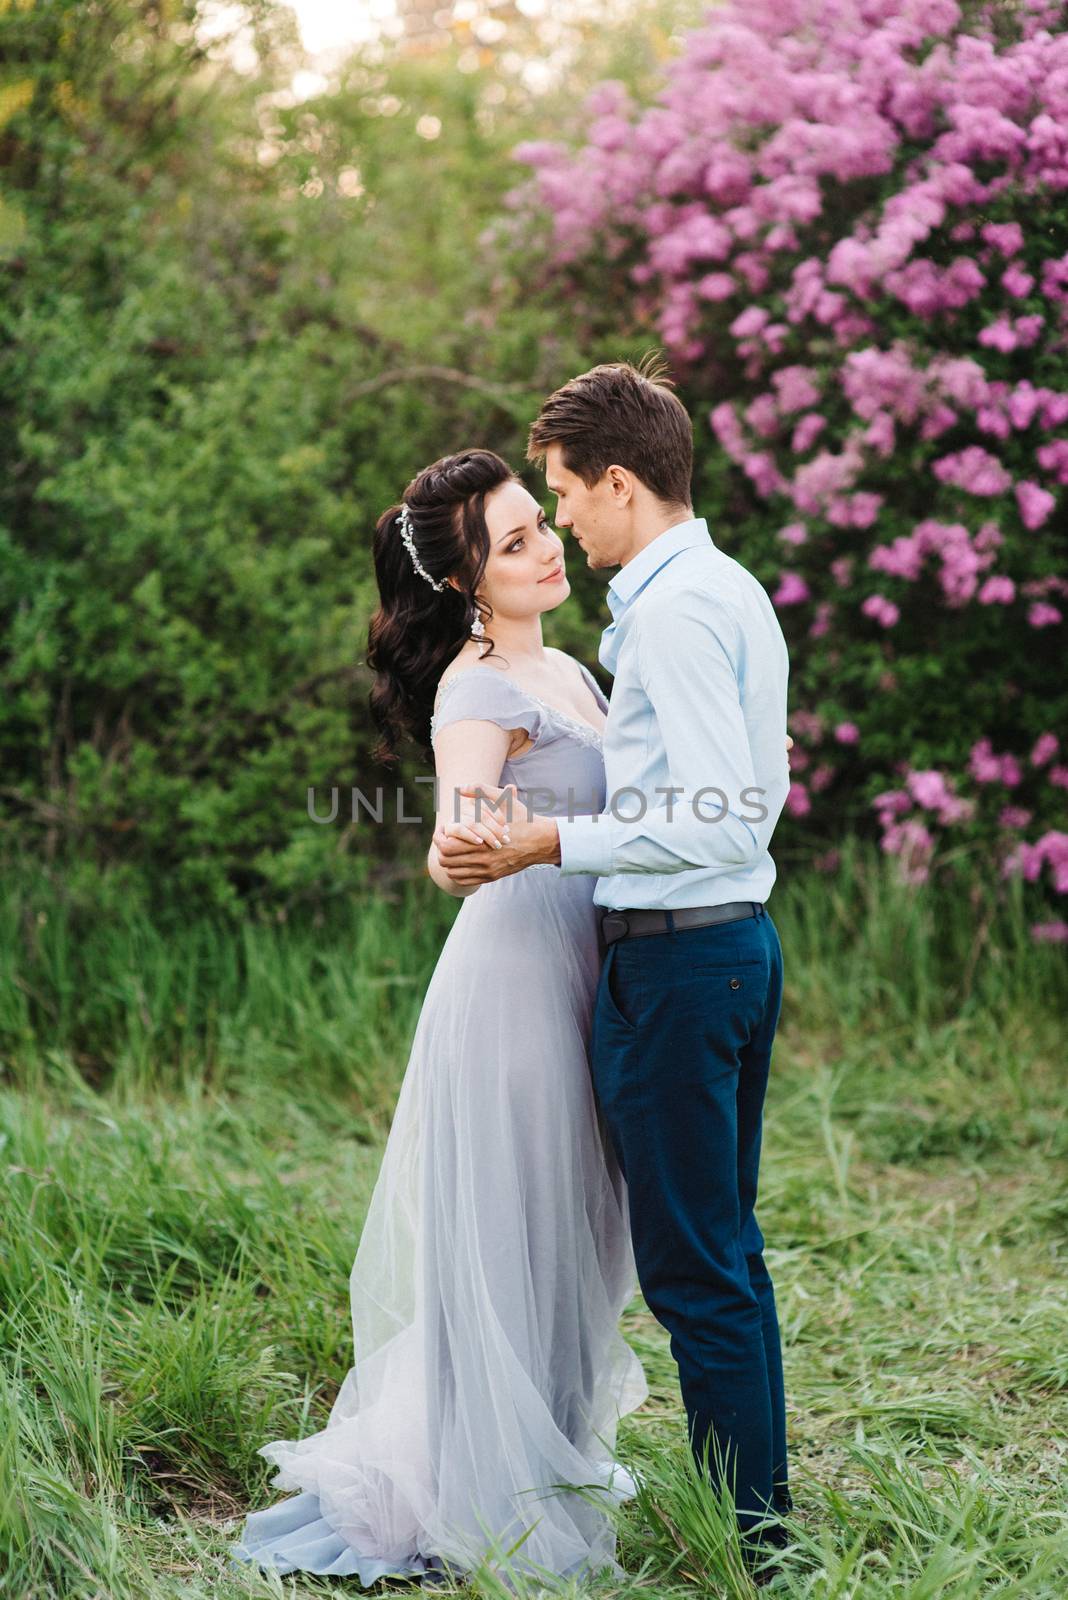 a guy and a girl walk in the spring garden of lilacs by Andreua